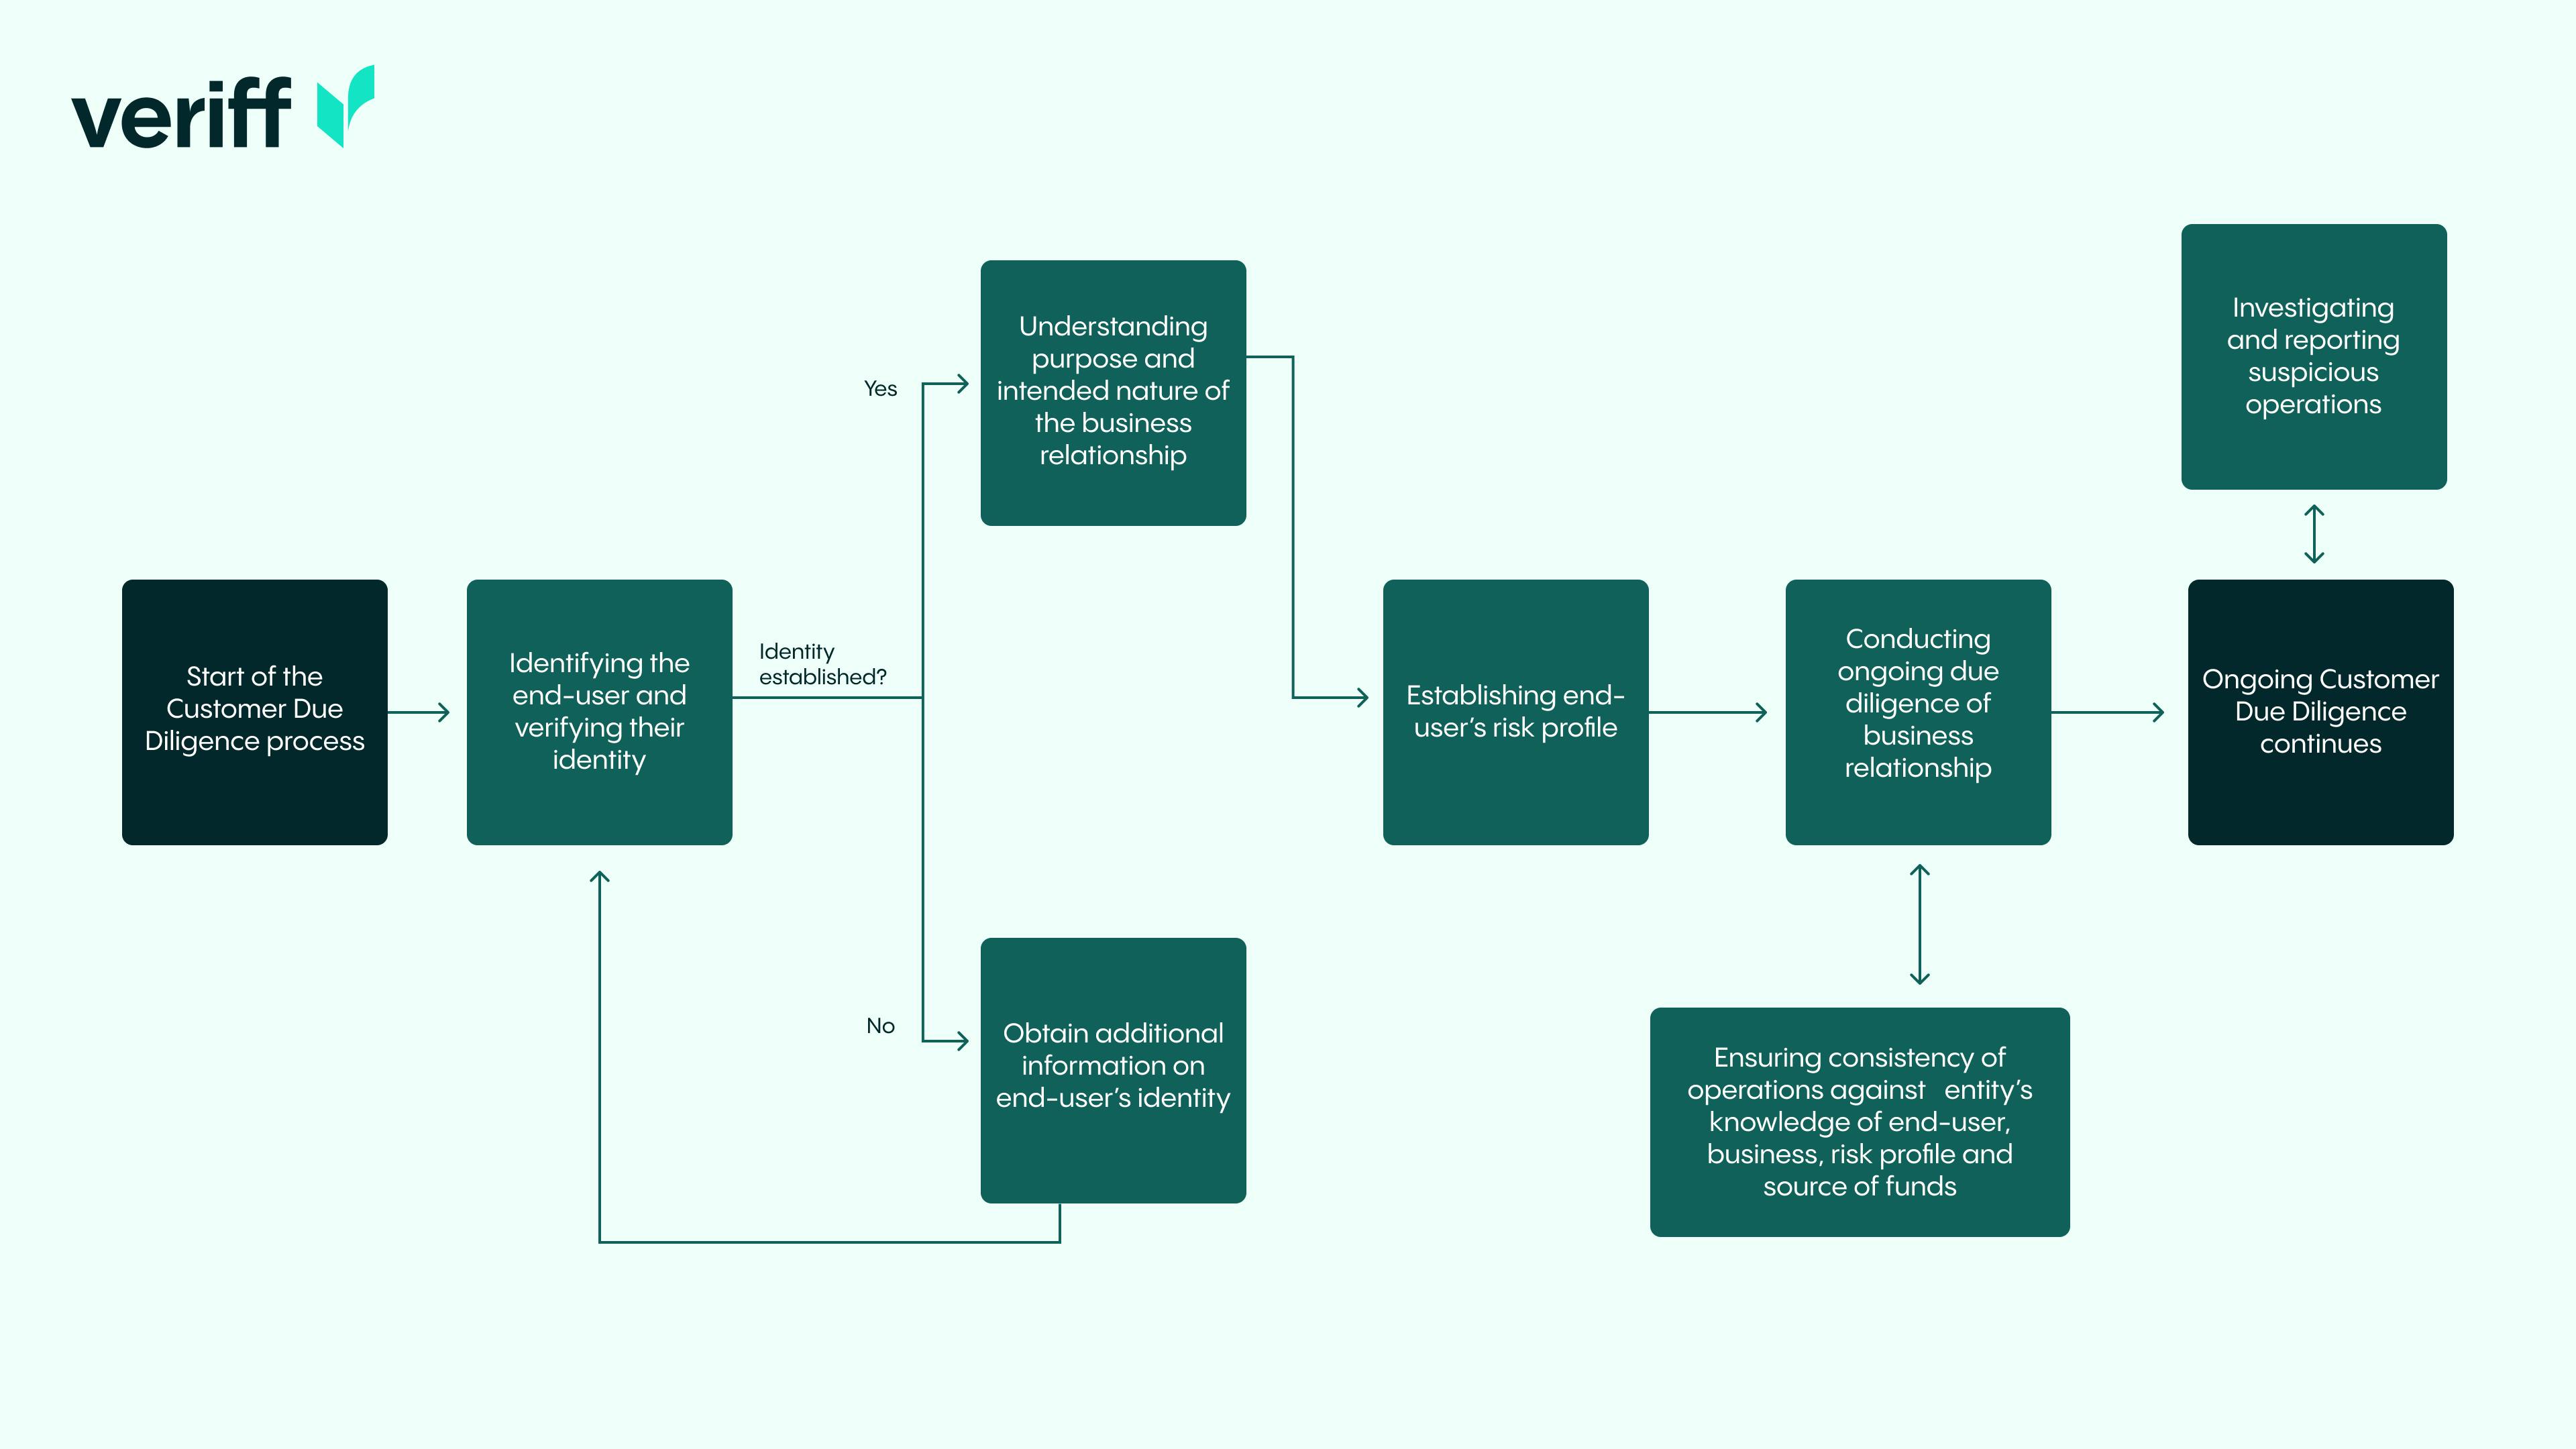 Flowchart of the typical customer due diligence process